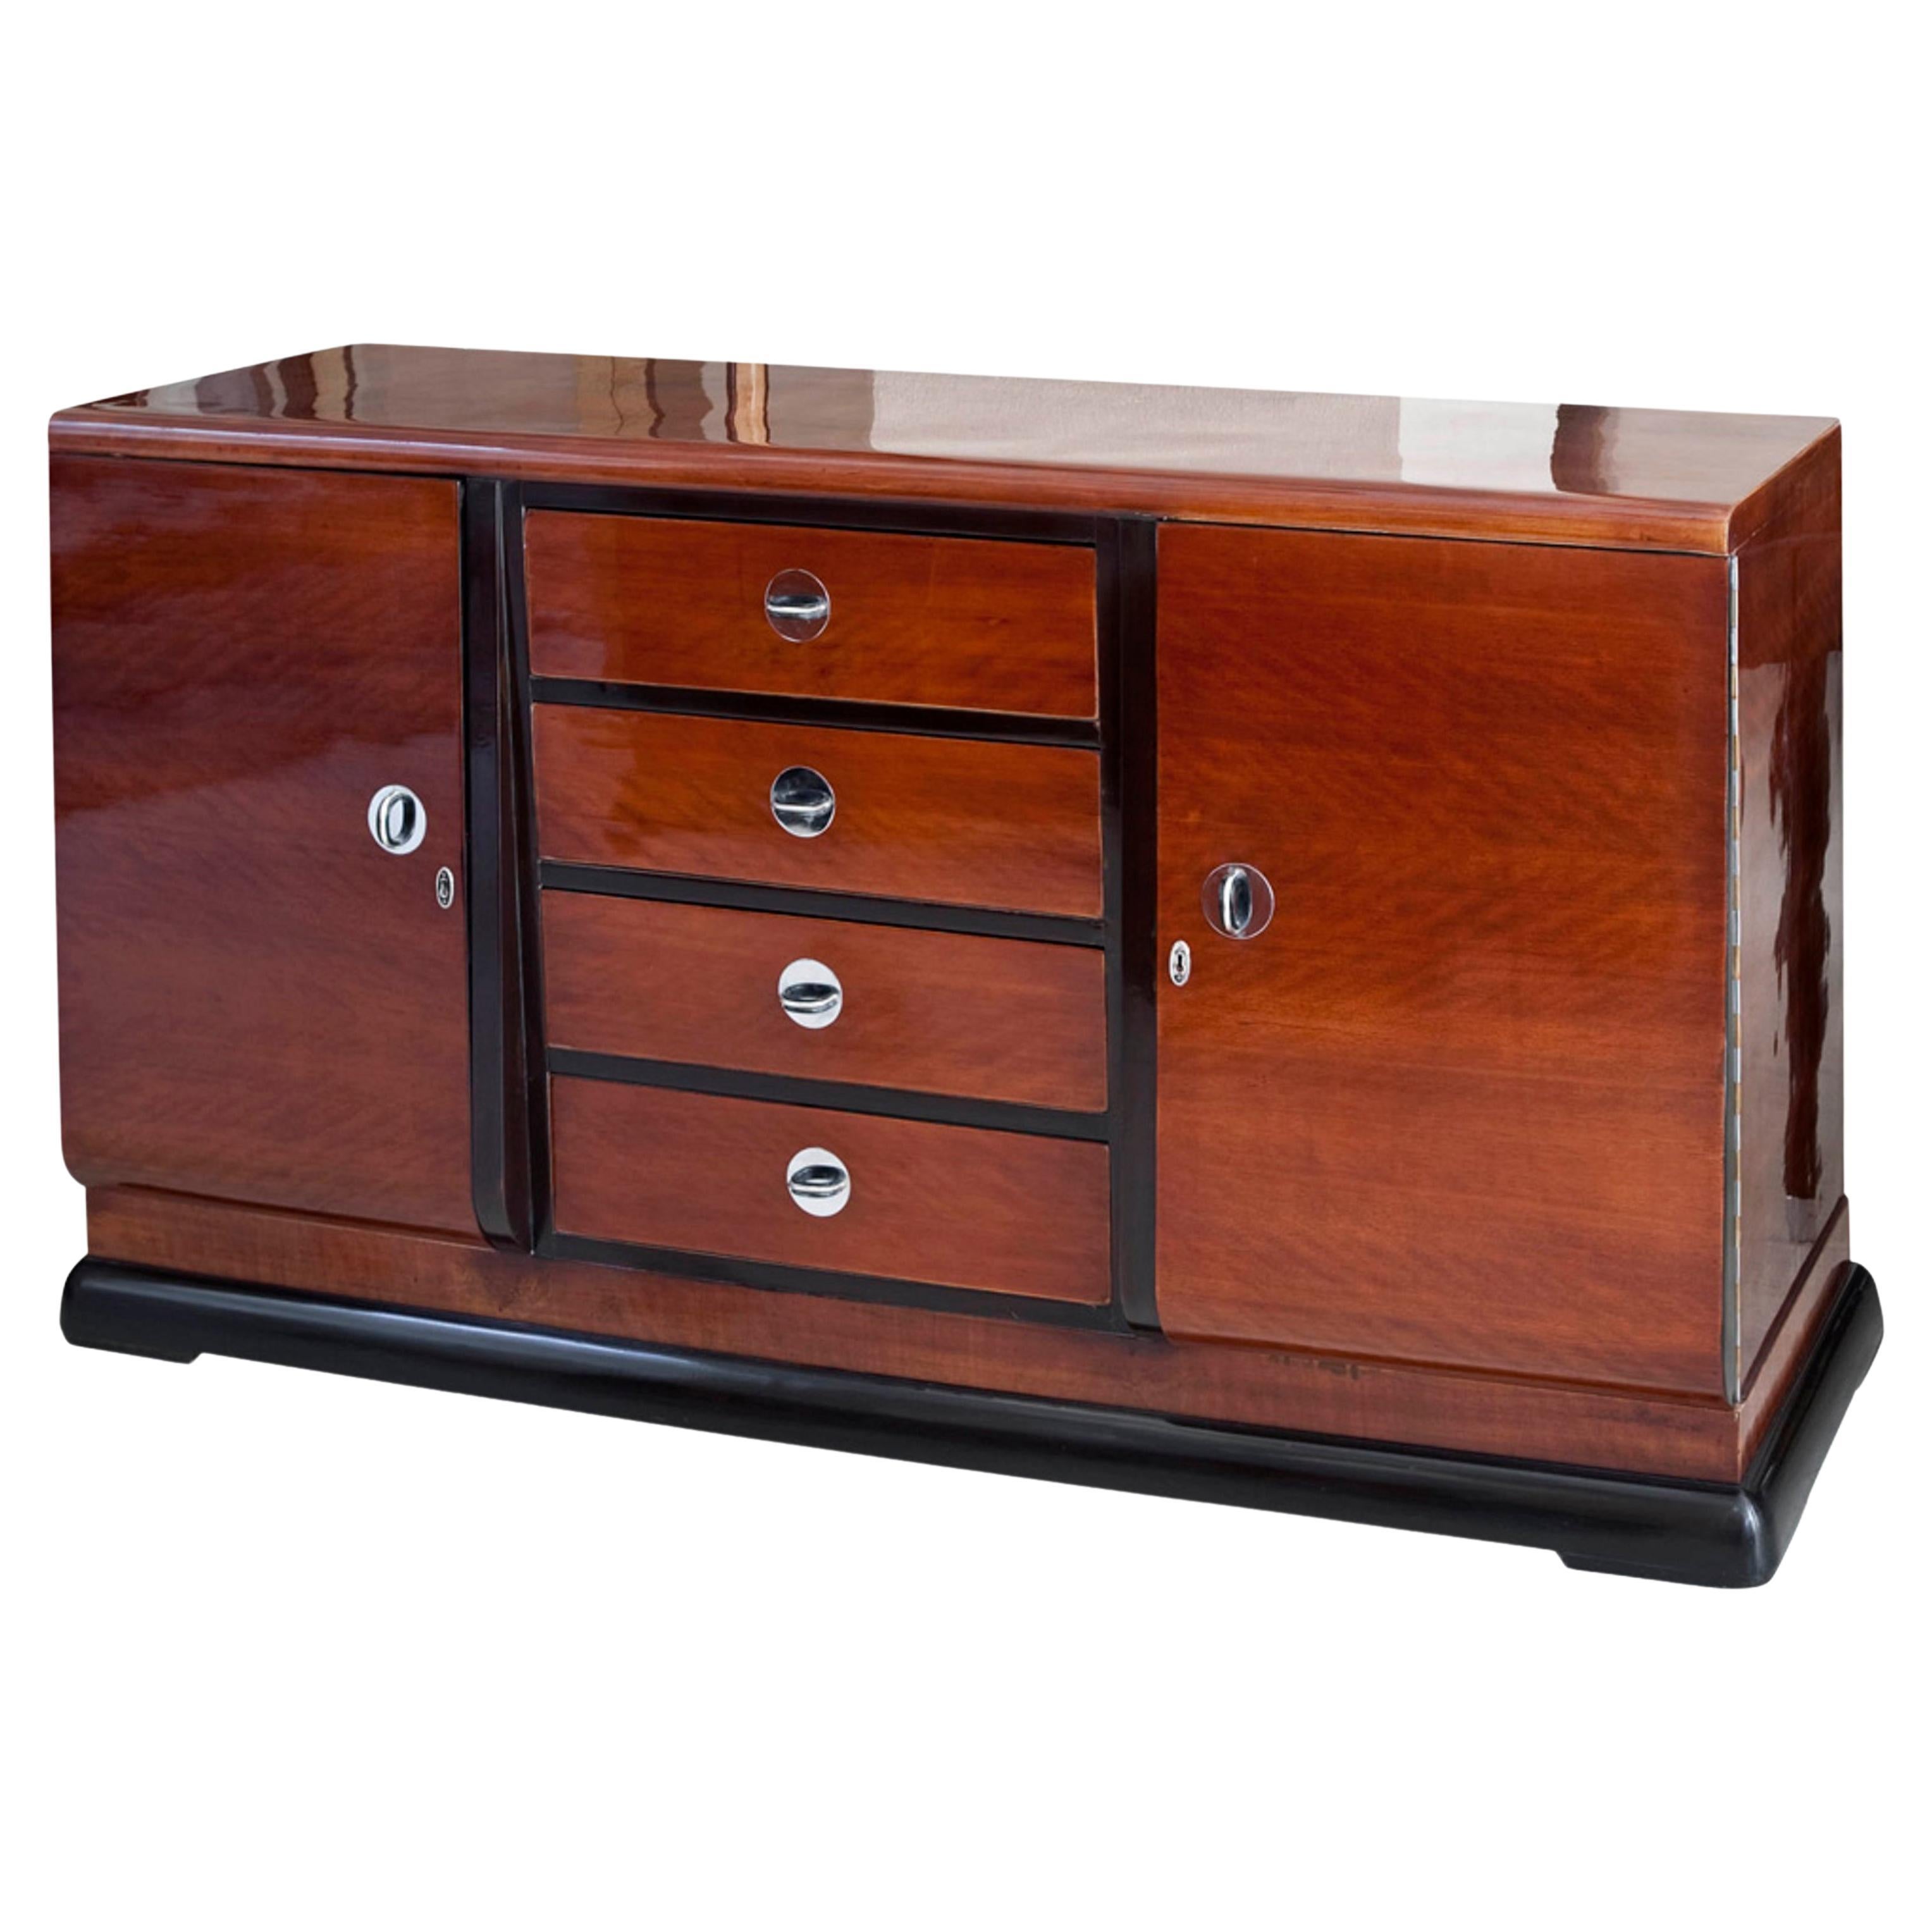 Art Deco Sideboard with Drawers in Wood